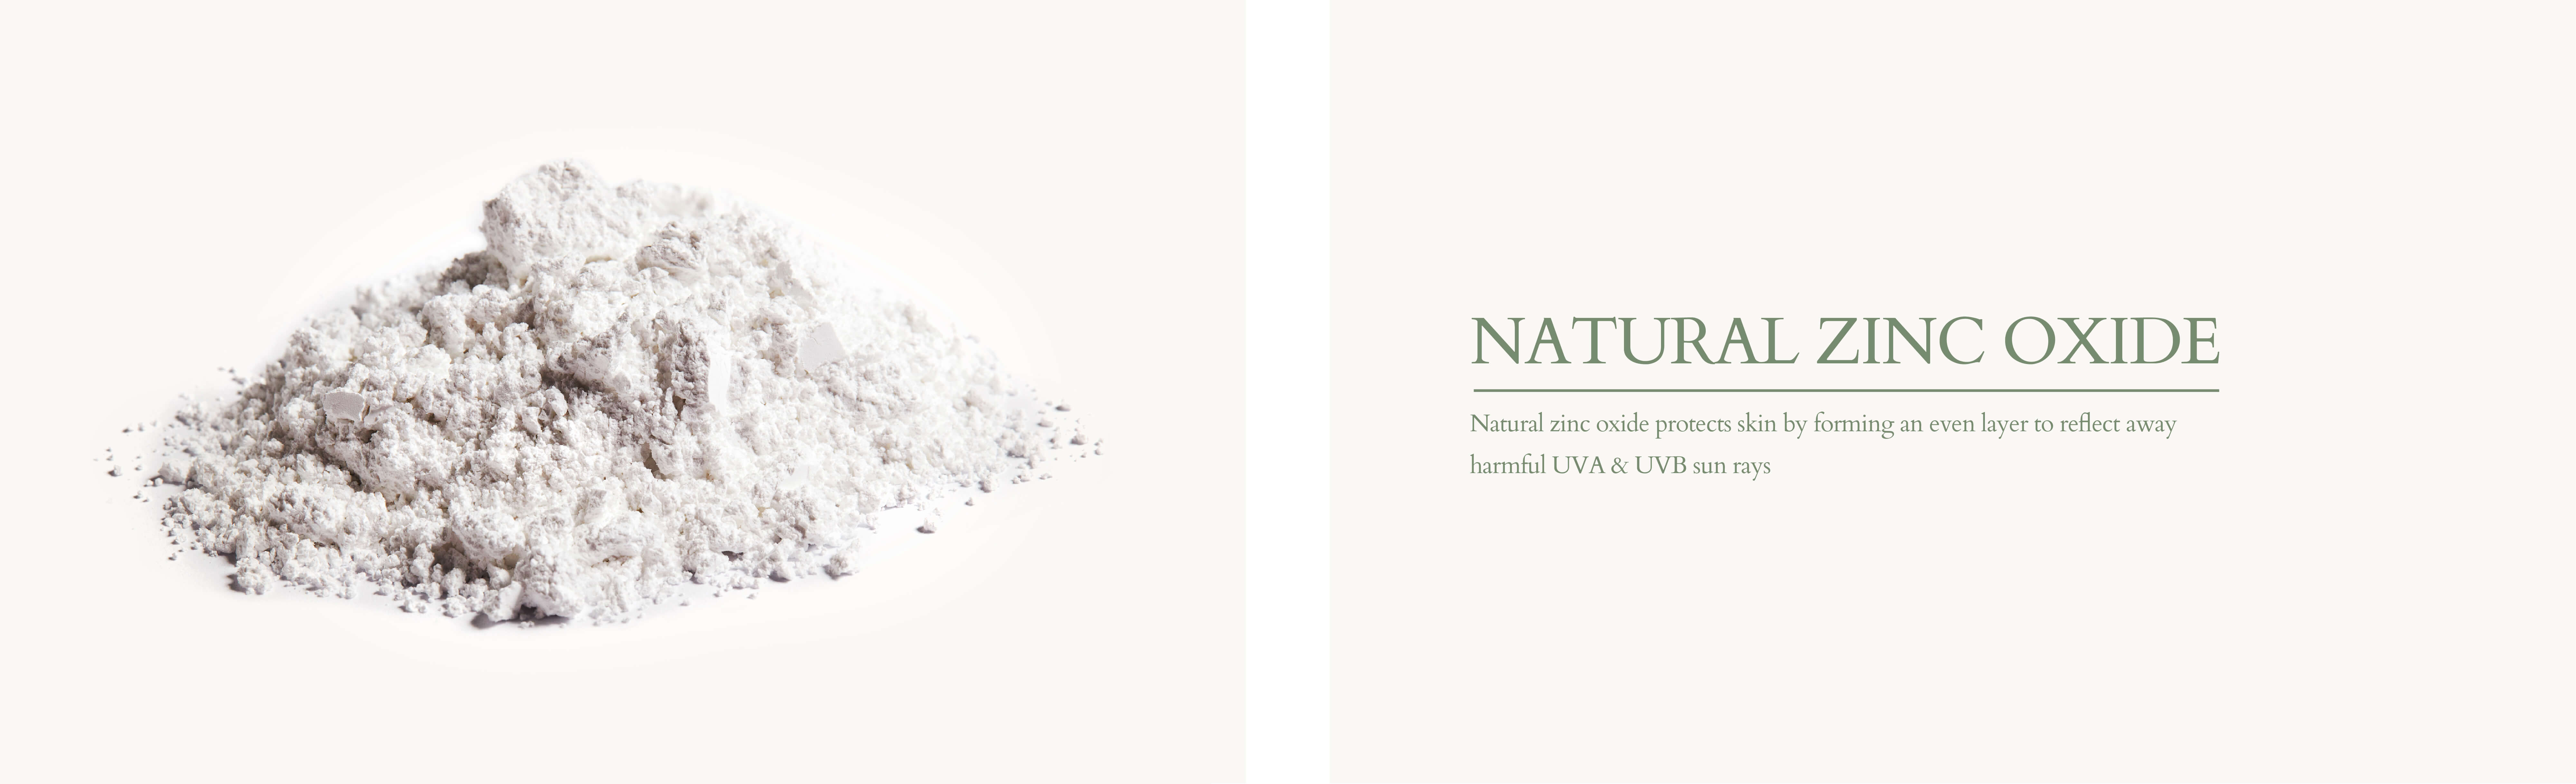 Natural zink oxide protects skin